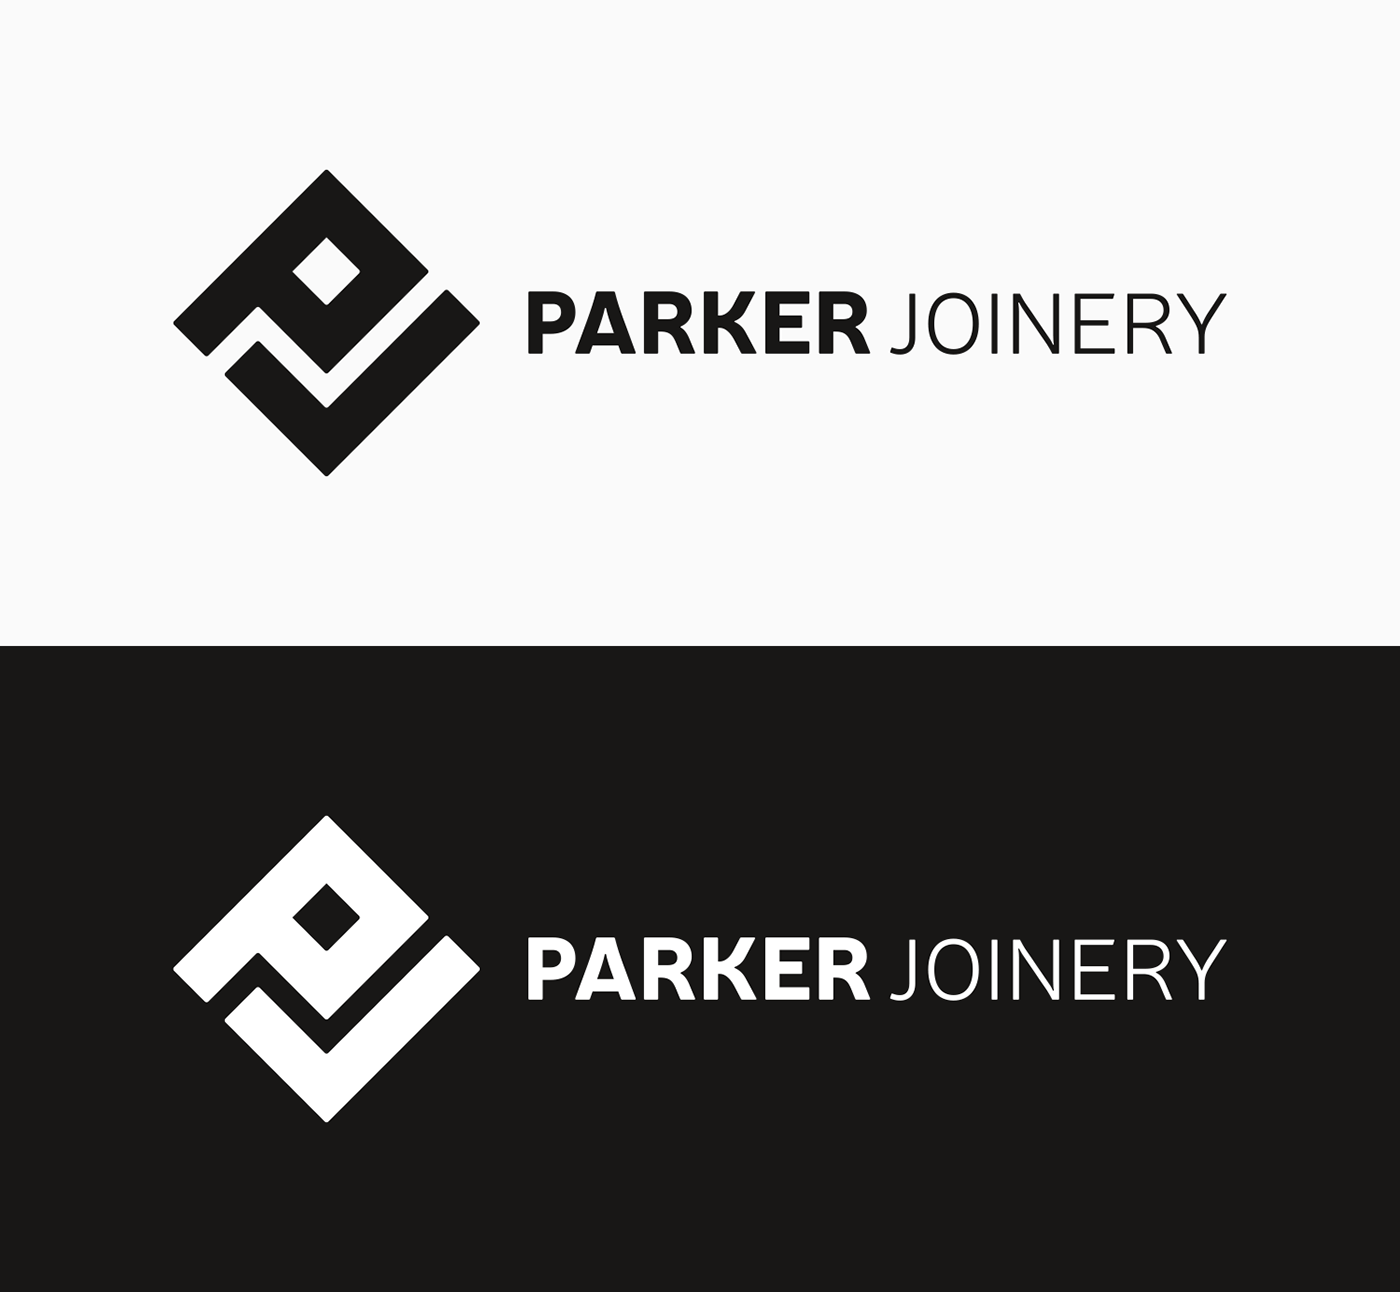 branding  sussex wood Joinery